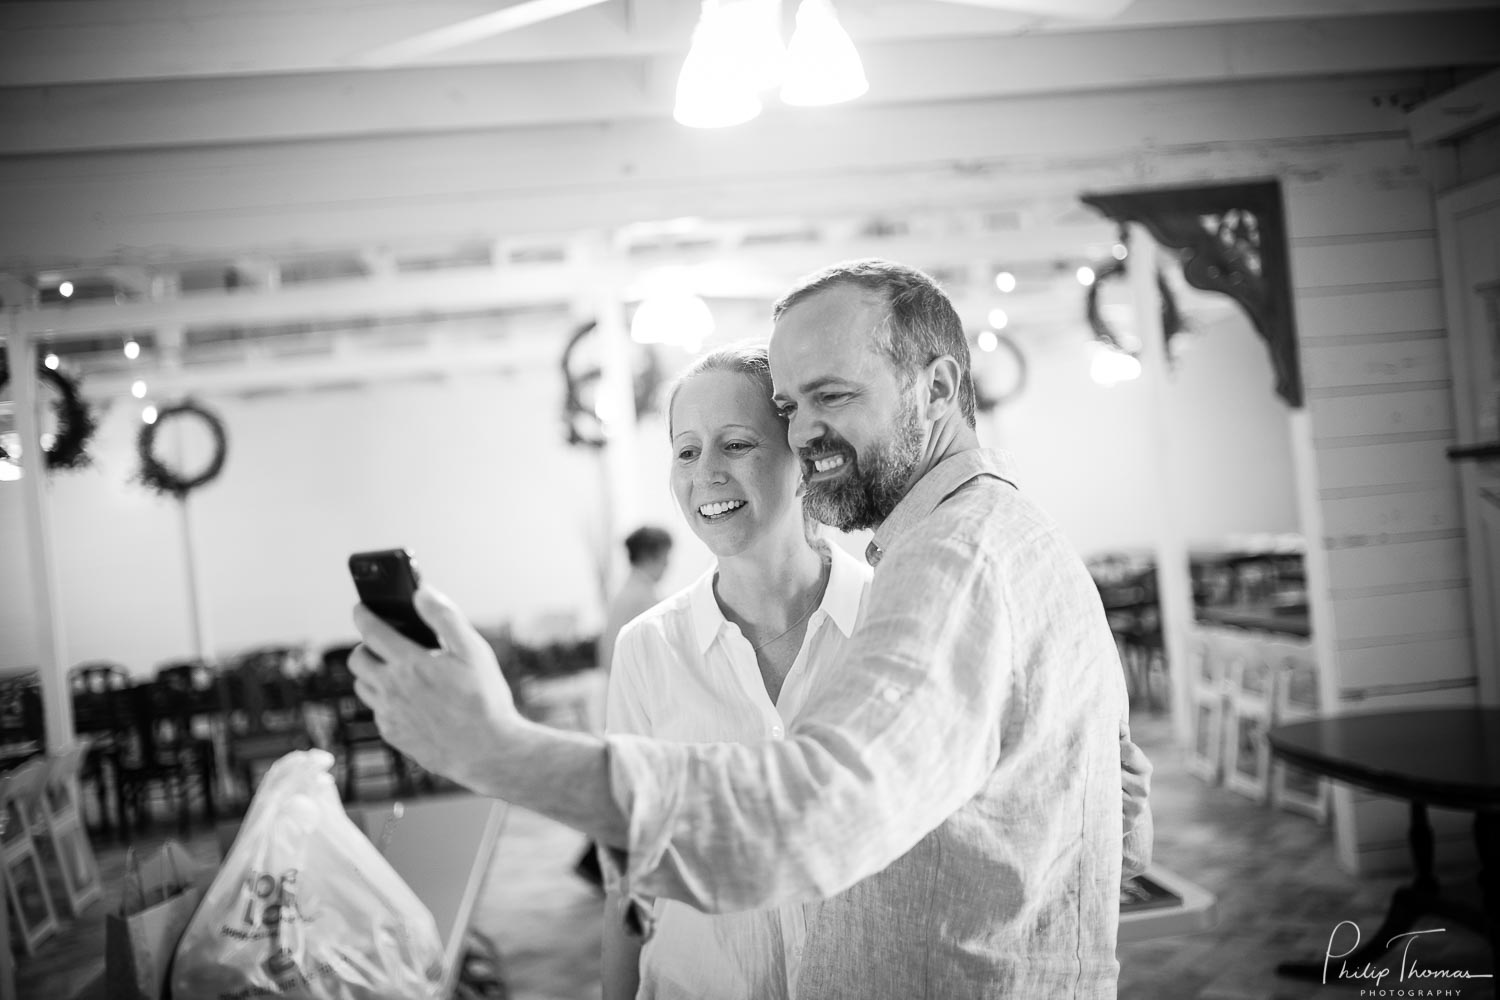 A selfie is created by Minta and Phillip on their wedding day